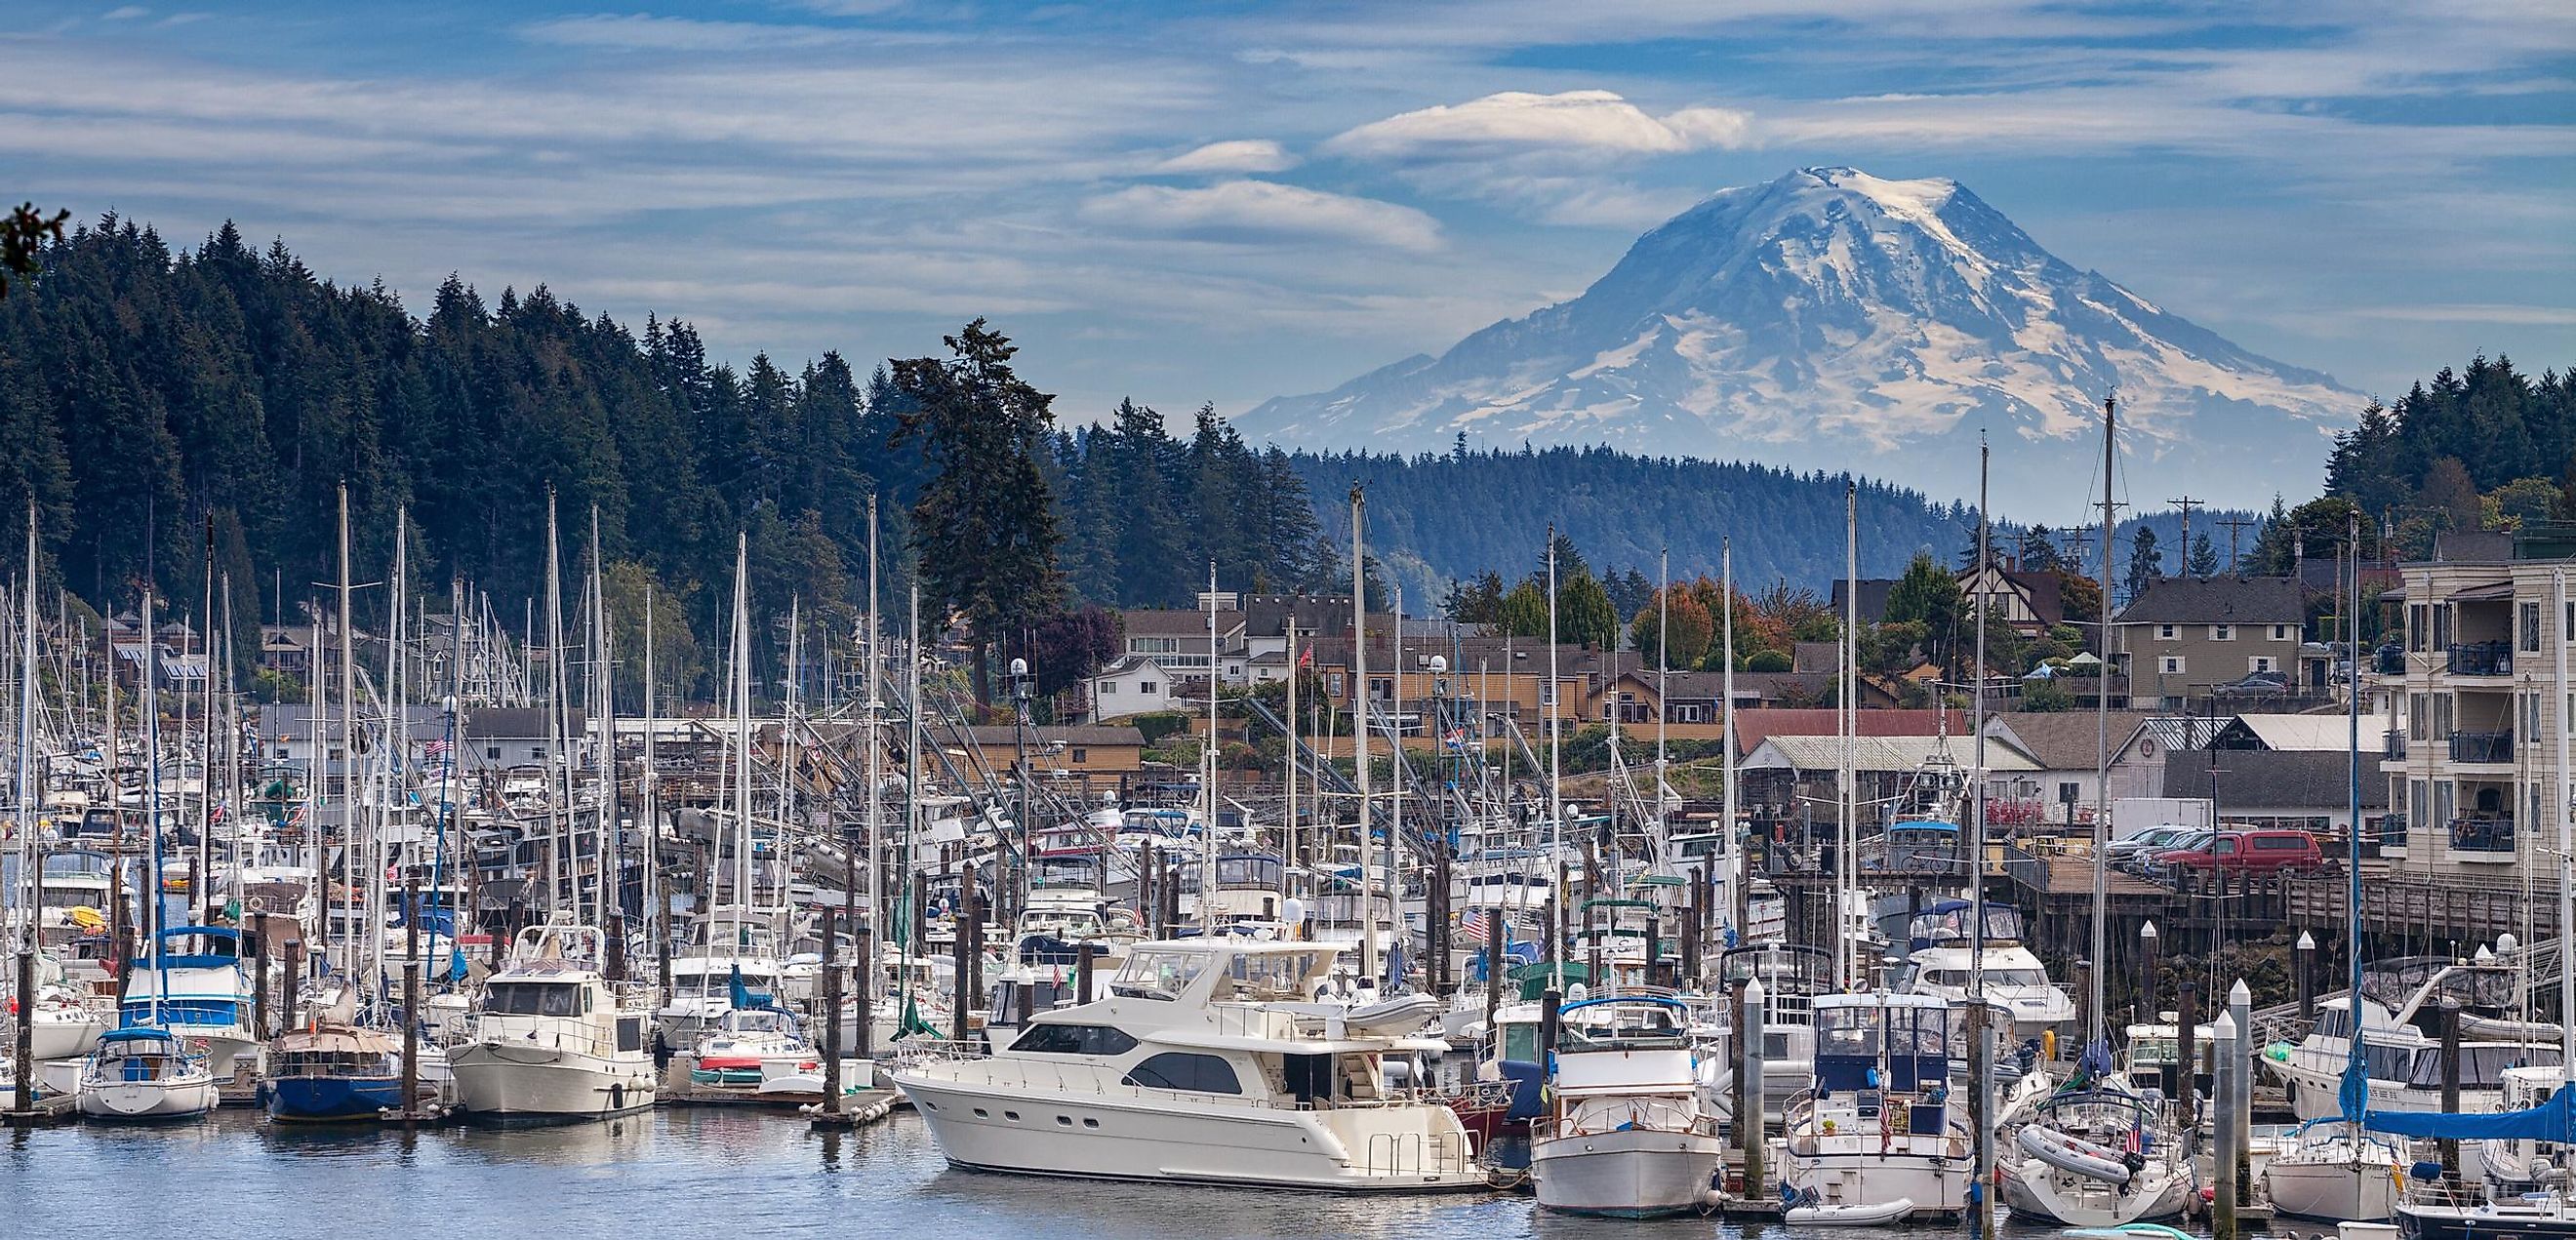 View of Gig Harbor, Washington with Mount Rainer in the background.